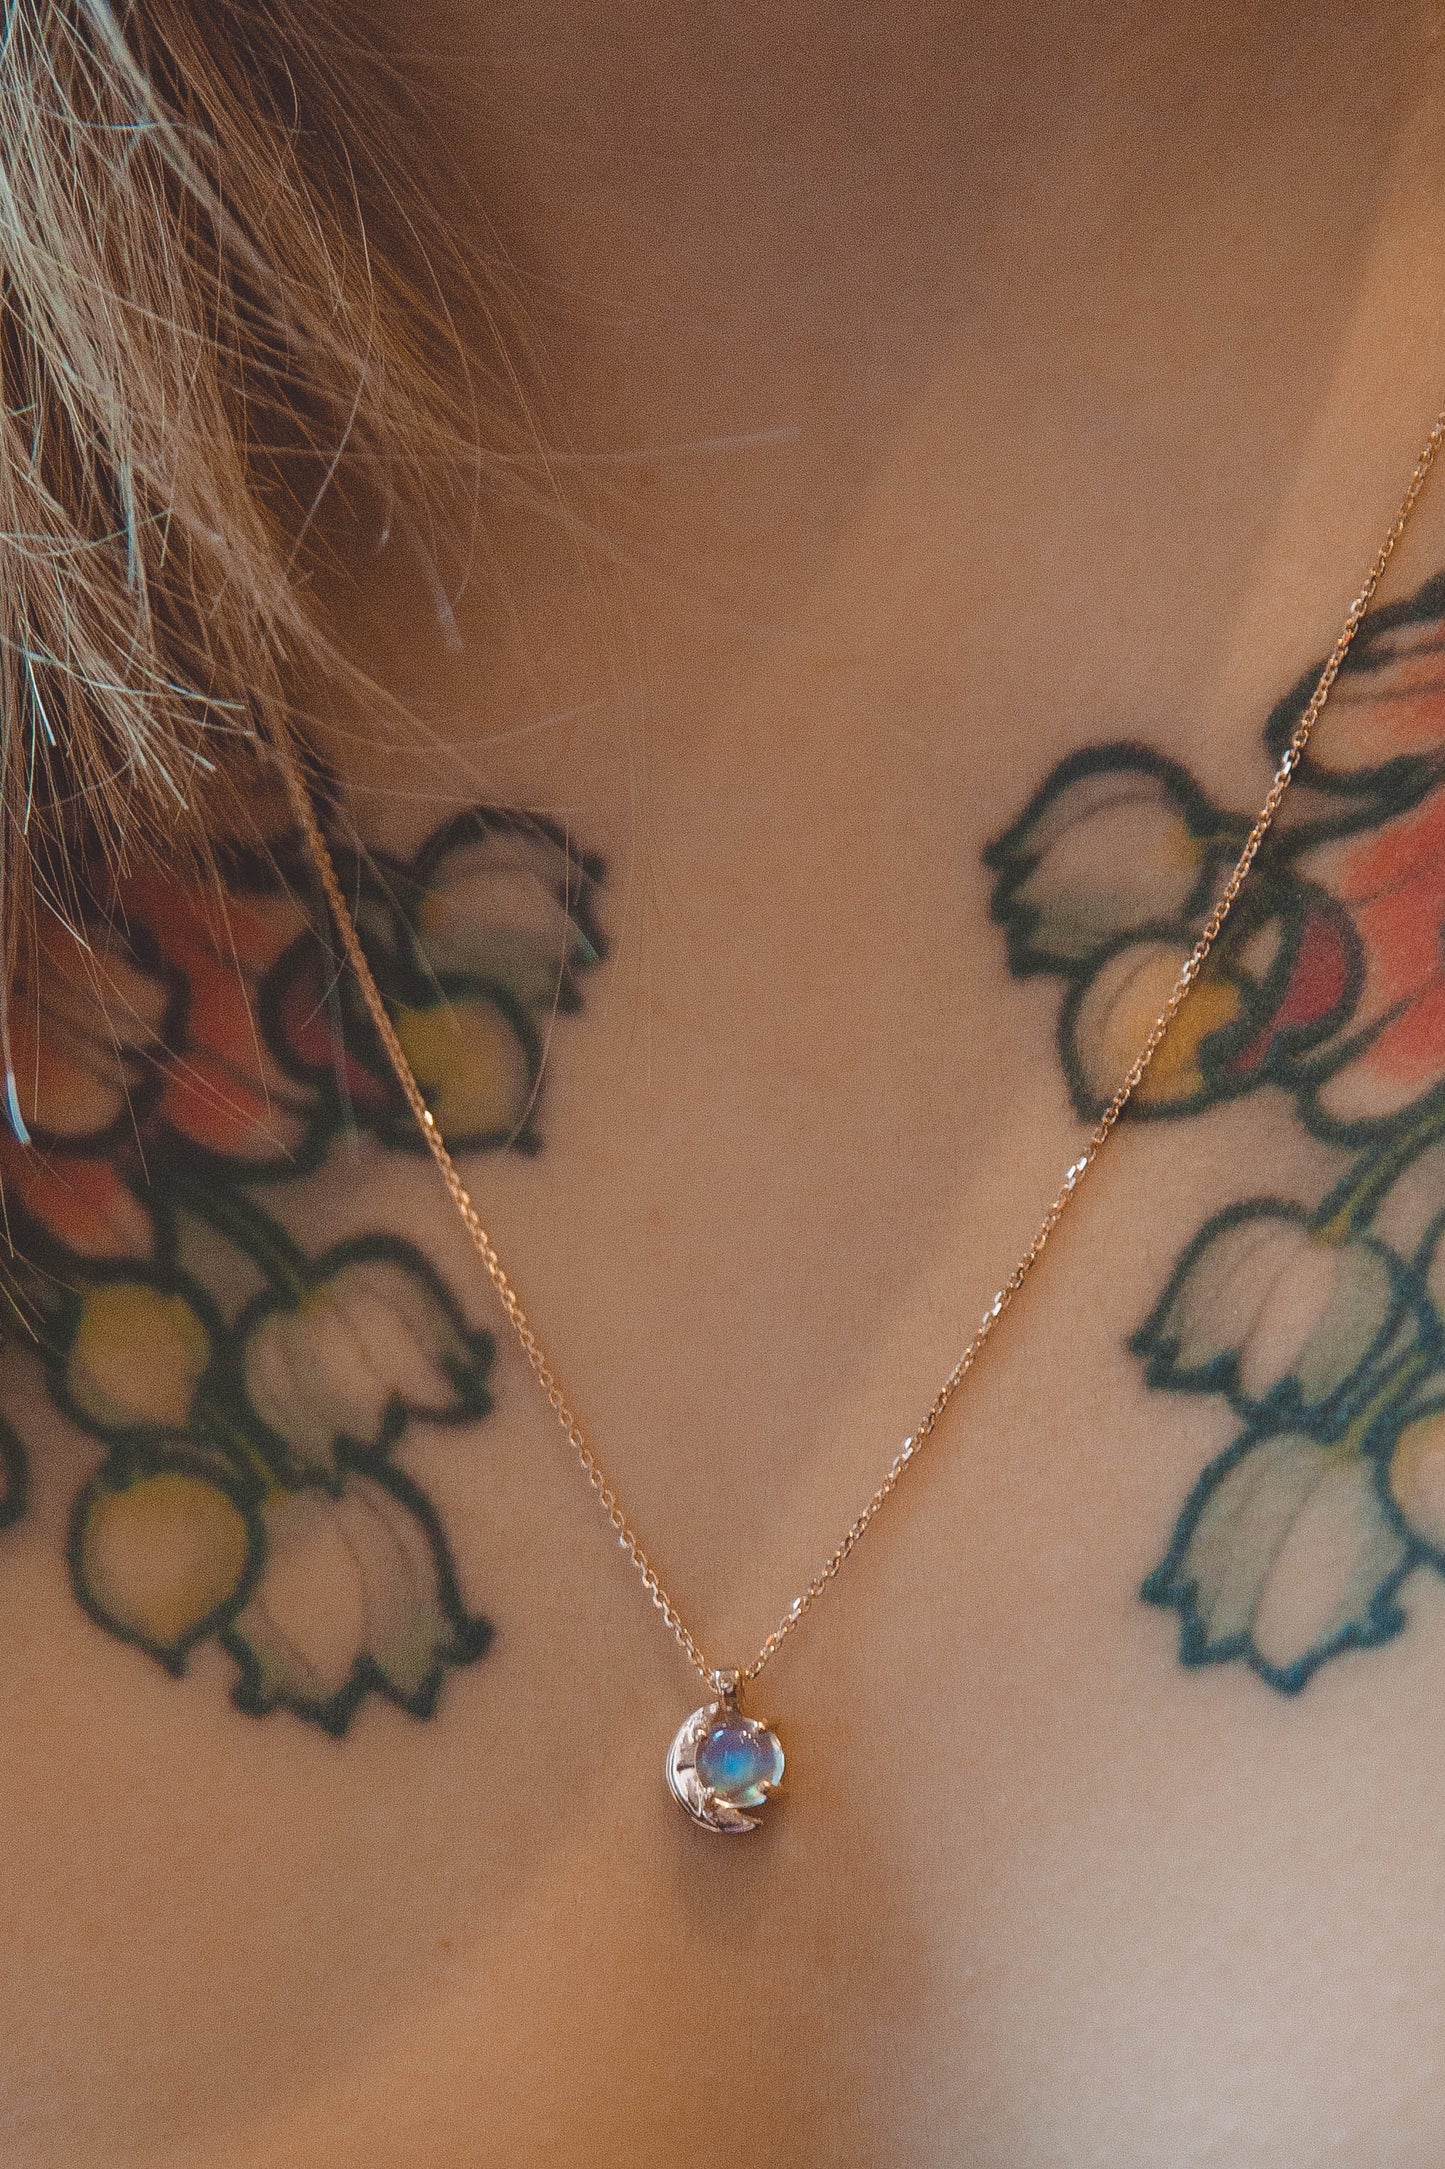 cremation urn necklace rose gold with moon